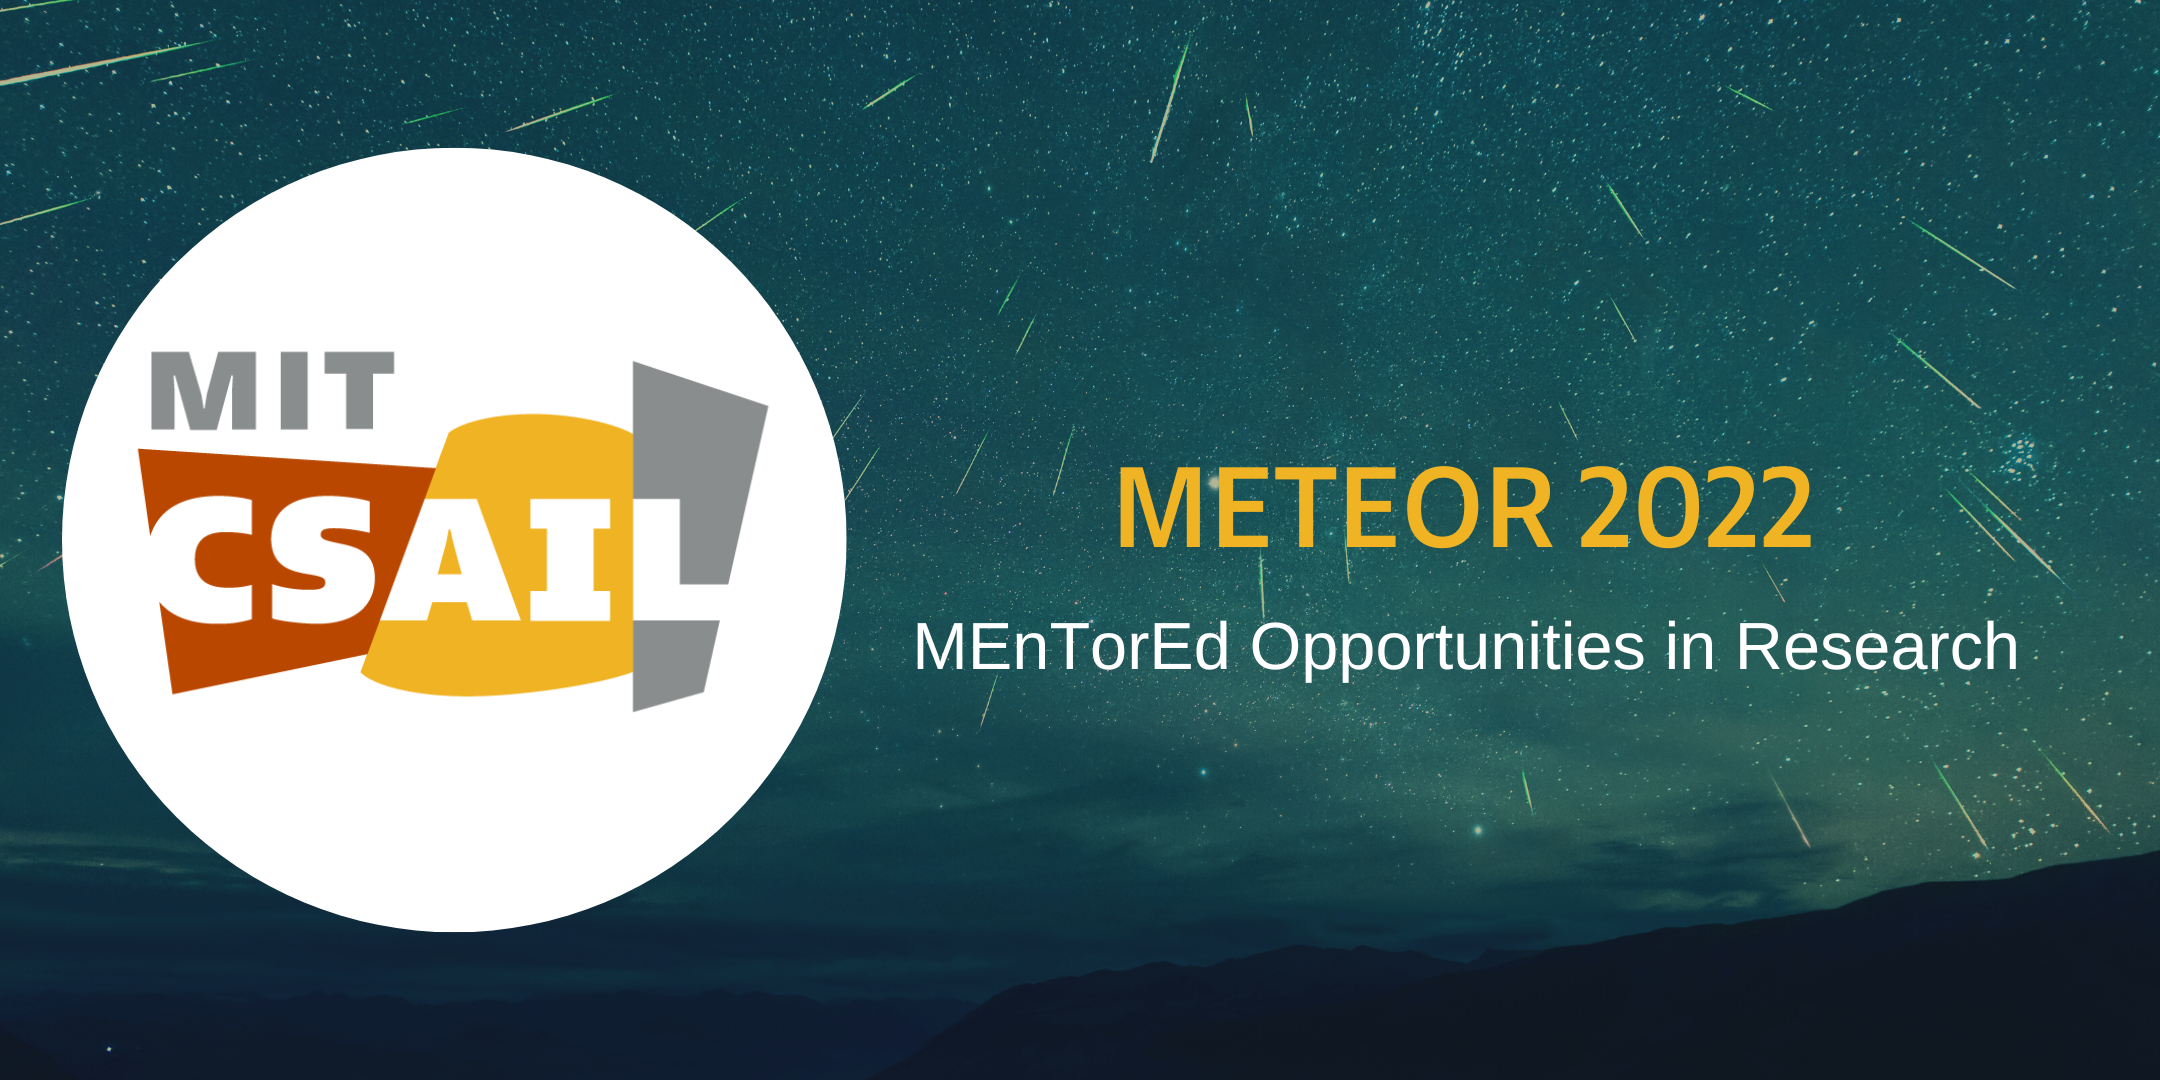 MIT CSAIL logo in front of galaxy with meteors; text that reads "METEOR: (MEnTorEd Opportunities in Research)" mentored 